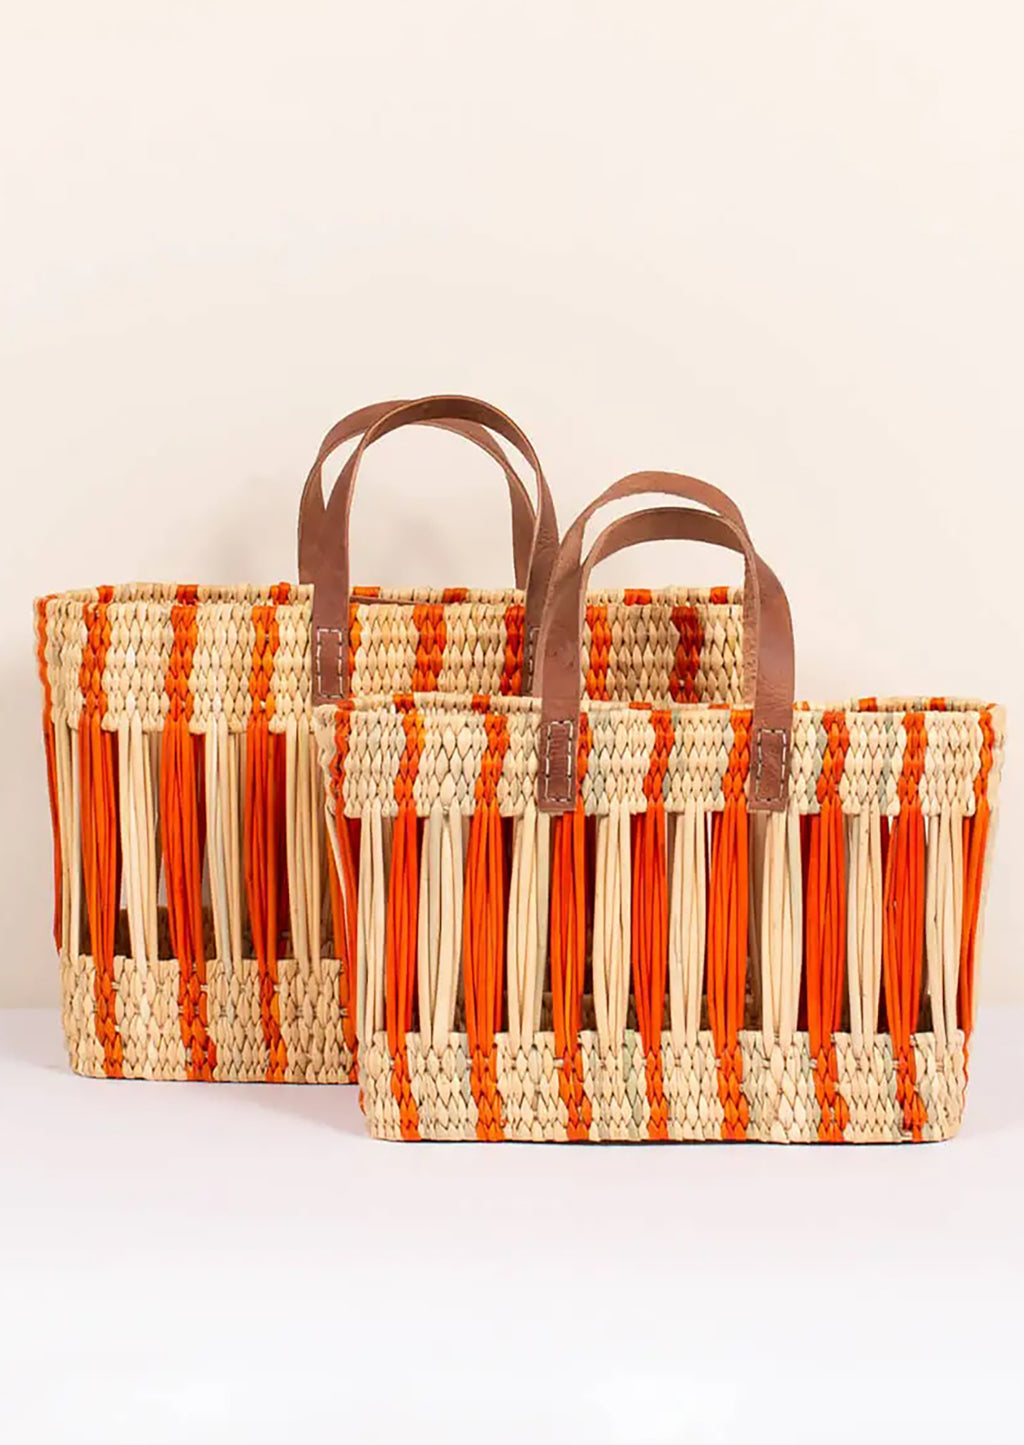 3: An oblong open weave basket in natural reed with bright orange stripes and brown leather handles.